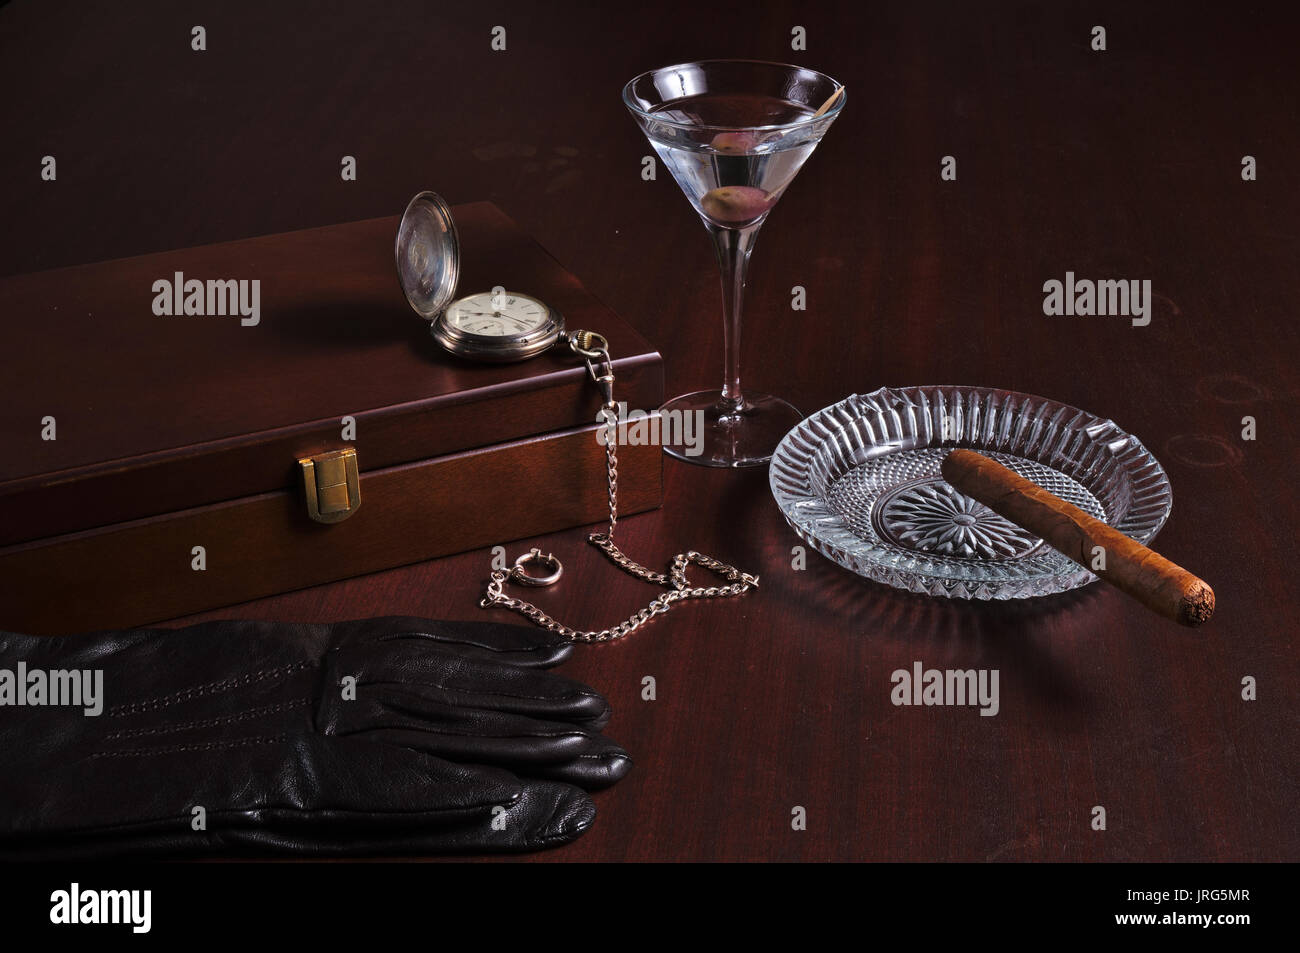 Cigarbox, pocket watch, Martini, Cuban cigar and leather gloves. Vintage gentlemens theme Stock Photo